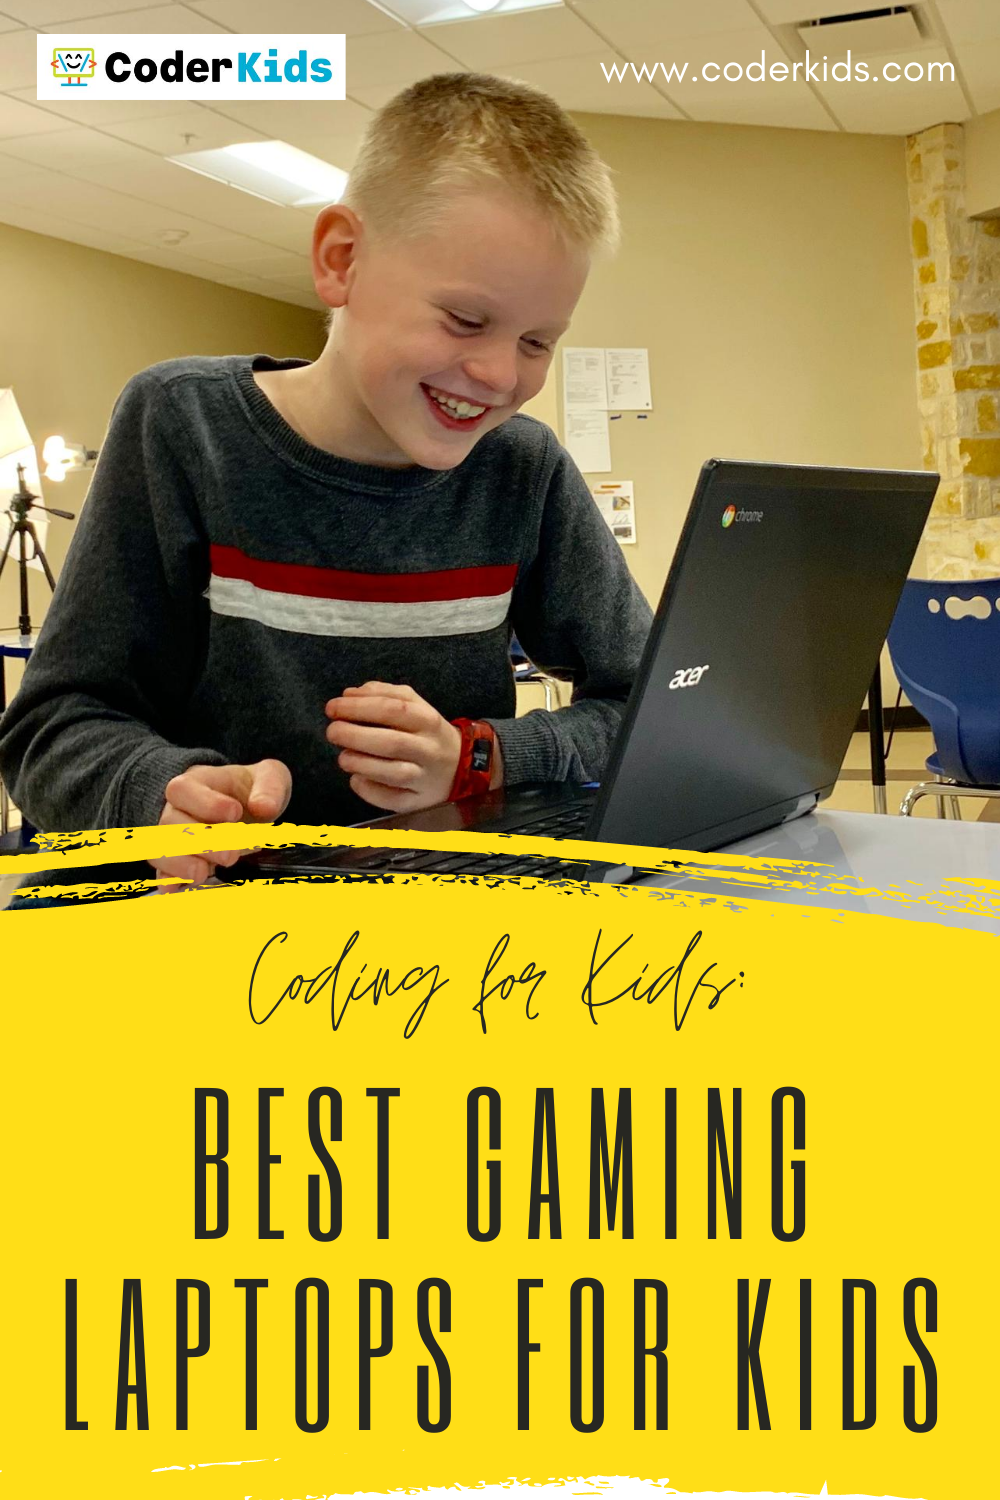 Get Your Kids Hooked on Learning with Free Computer Games